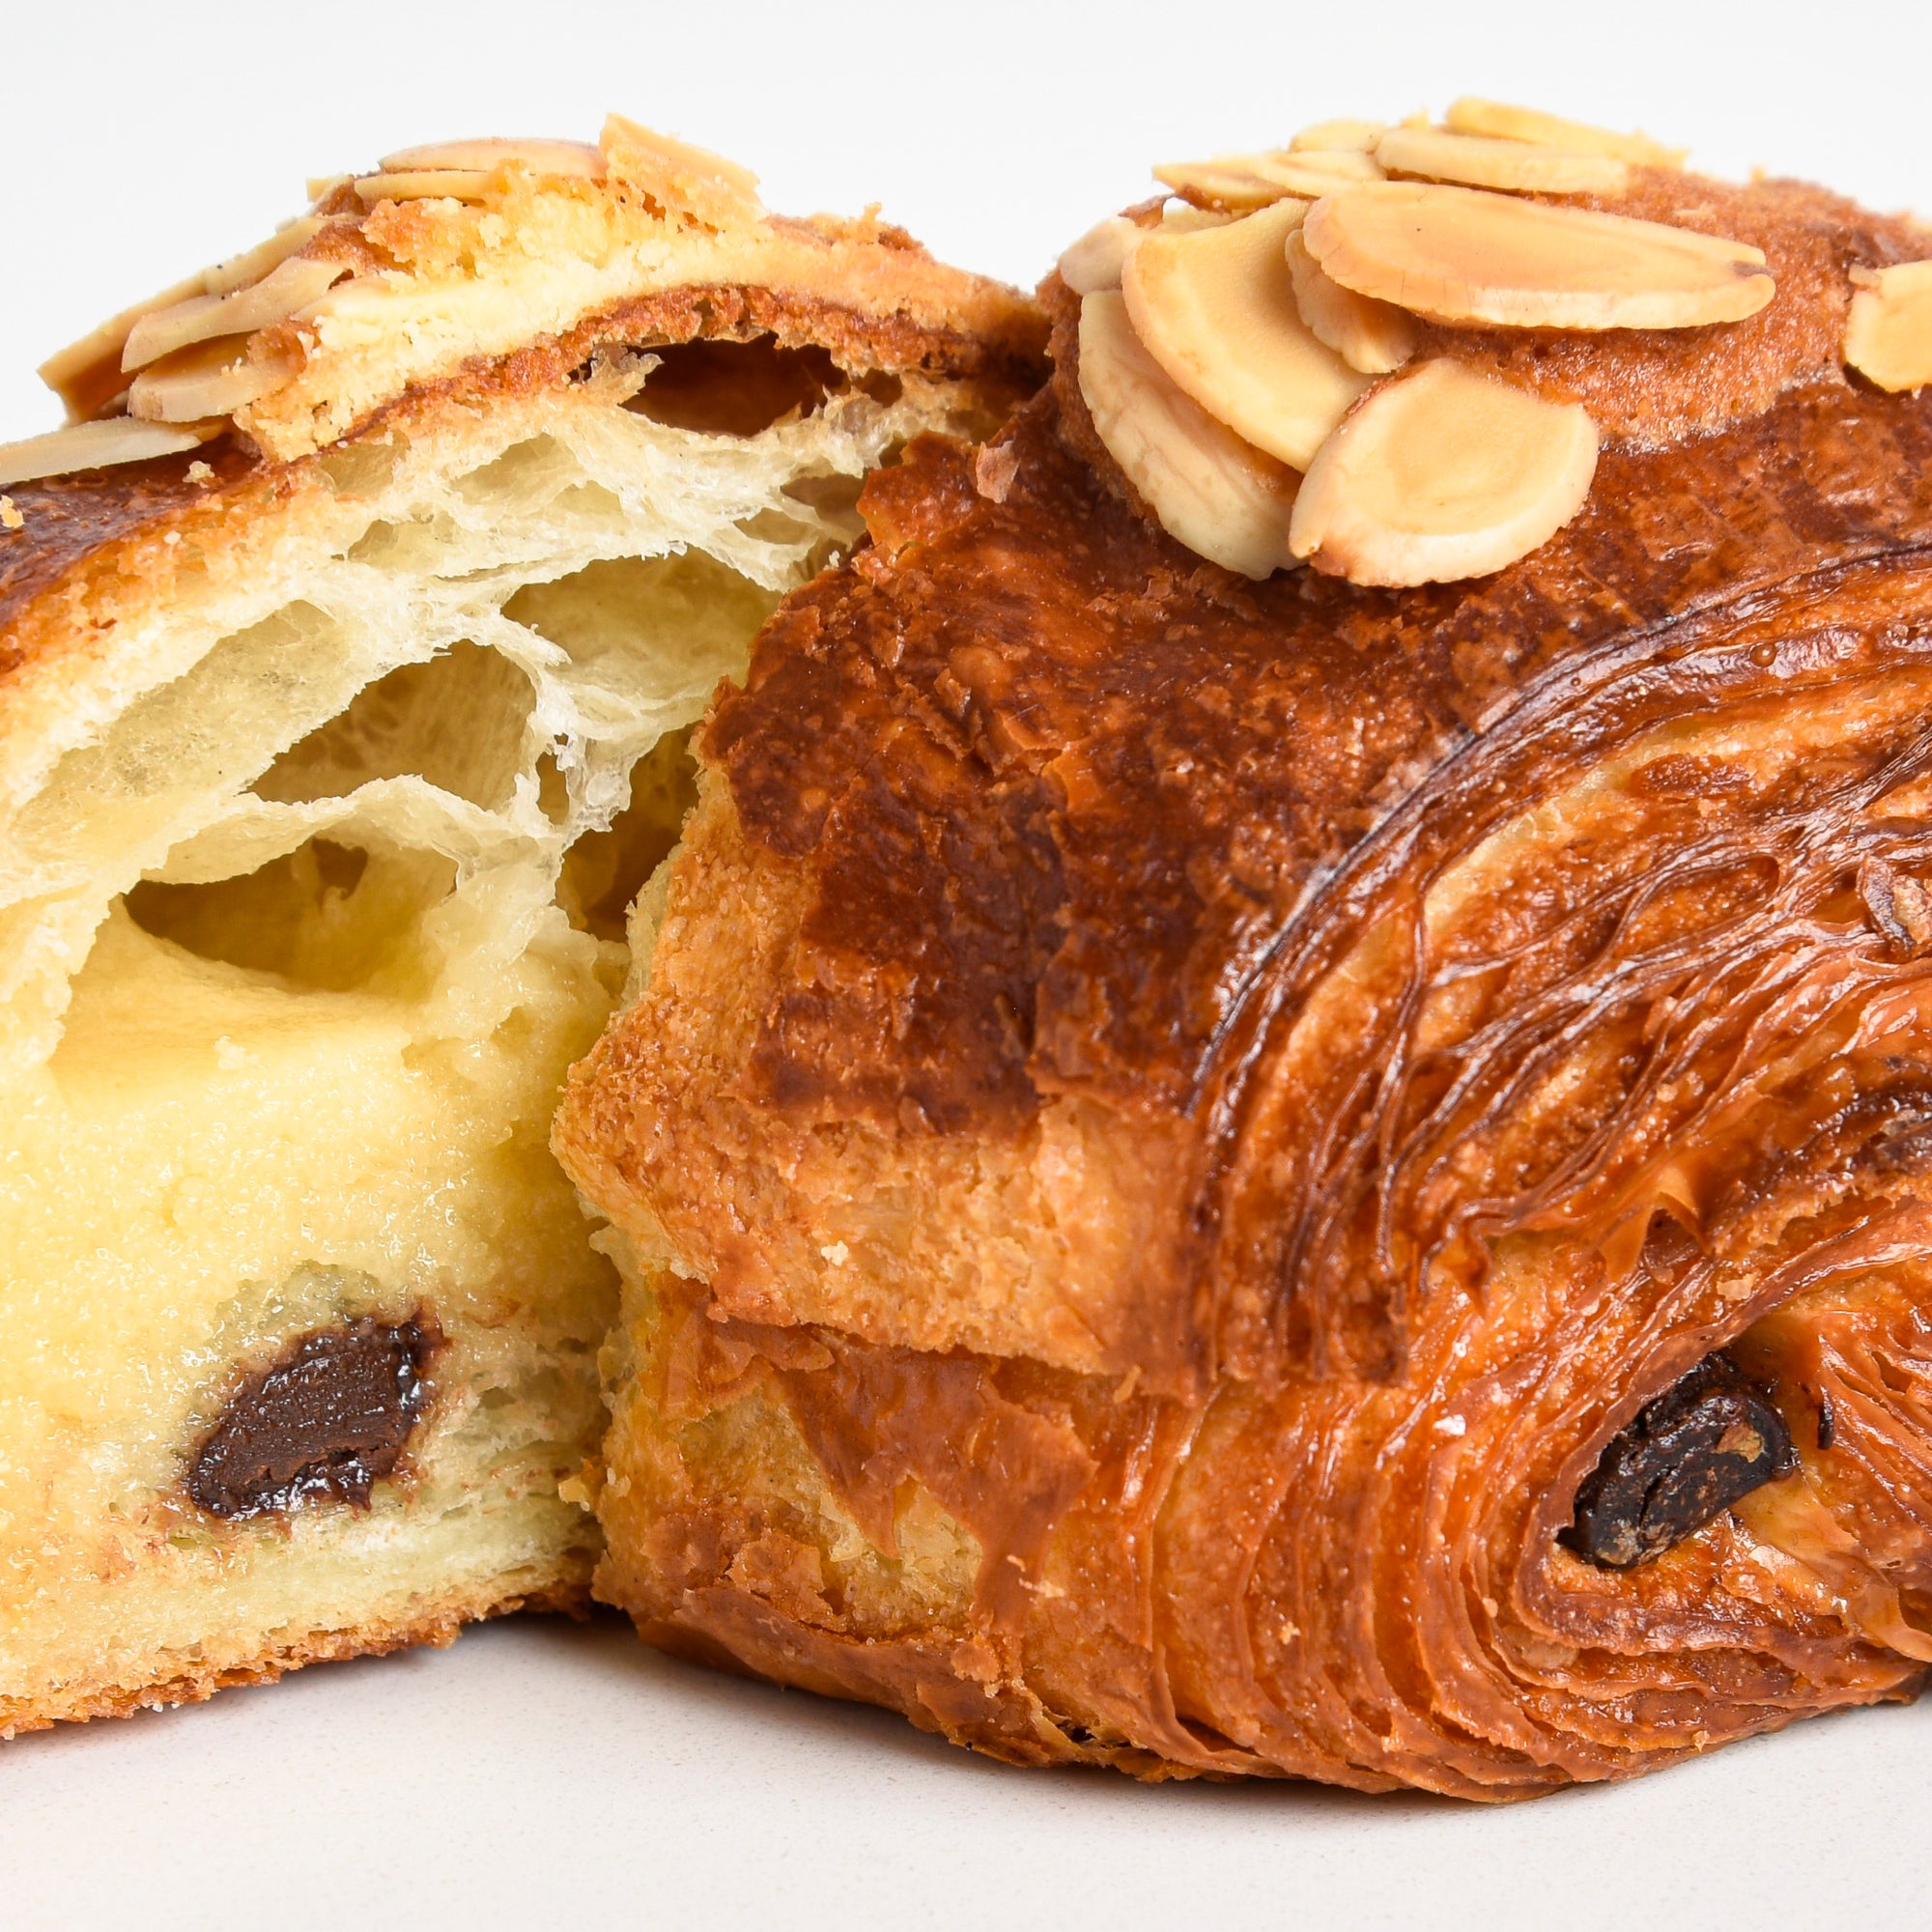 Cross section of Le fournil bakery chocolatine aux amandes pain au chocolat with almond cream